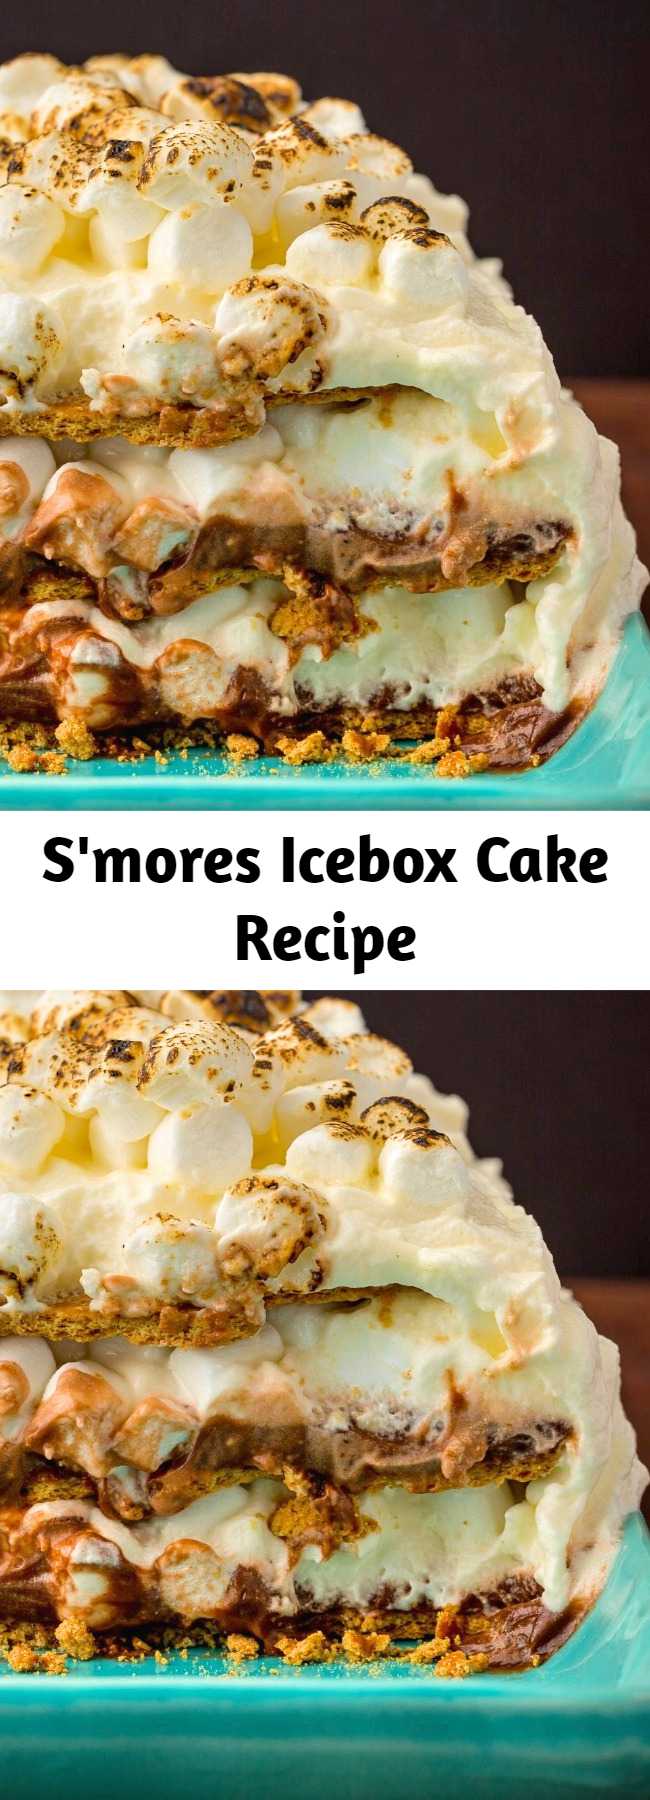 If You're Obsessed With Roasting Marshmallows, You Need to Taste This S'Mores Icebox Cake. It's five layers of s'mores bliss. The marshmallow whipped cream is everything.